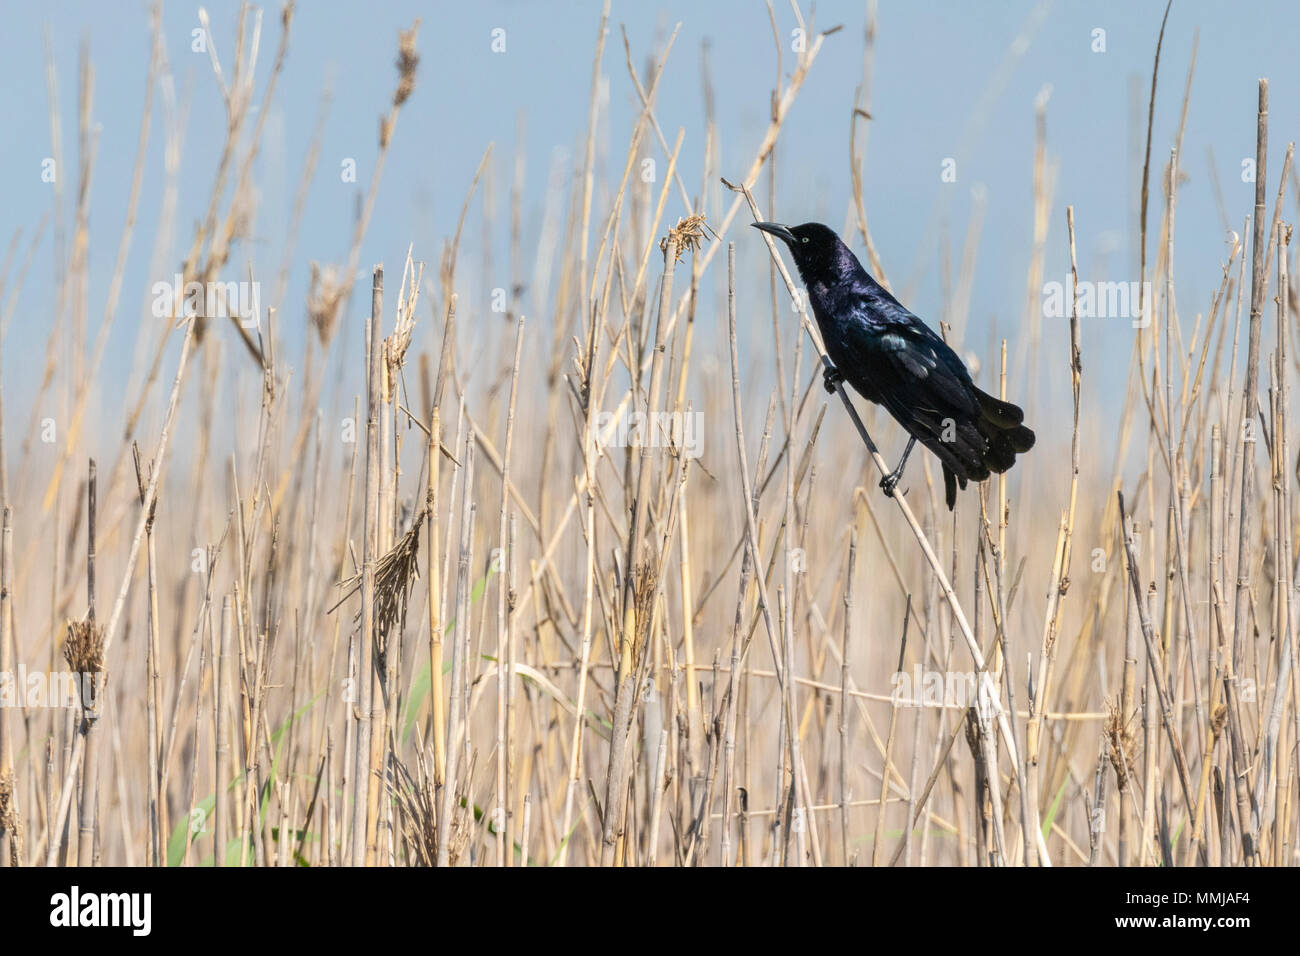 Grackle comune di Anahuac National Wildlife Refuge in Texas. Foto Stock